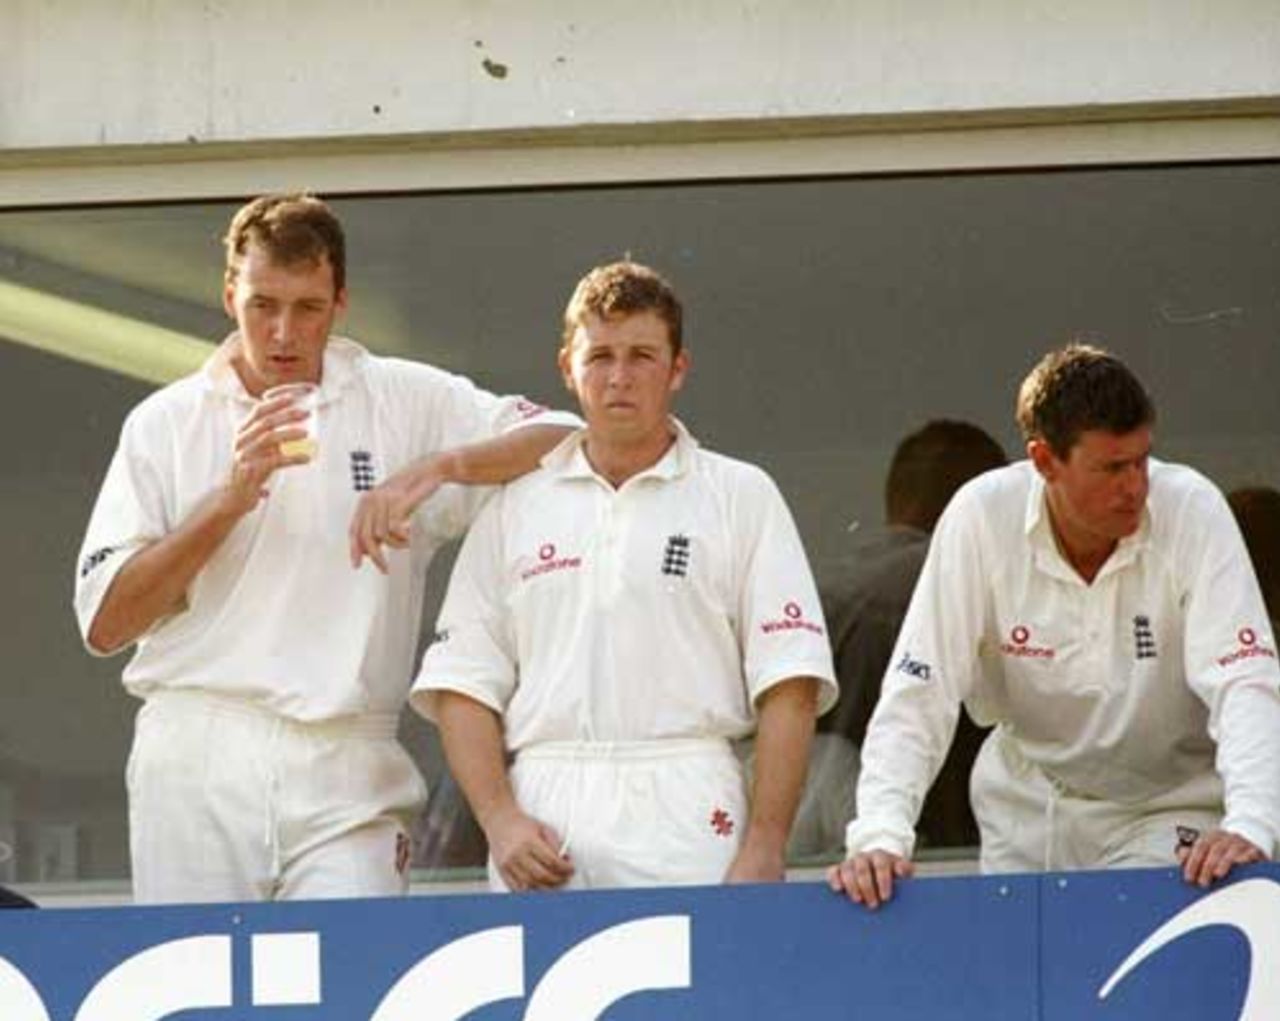 Angus Fraser and Robert Croft on the balcony, England v South Africa, third Test, Old Trafford, 1998